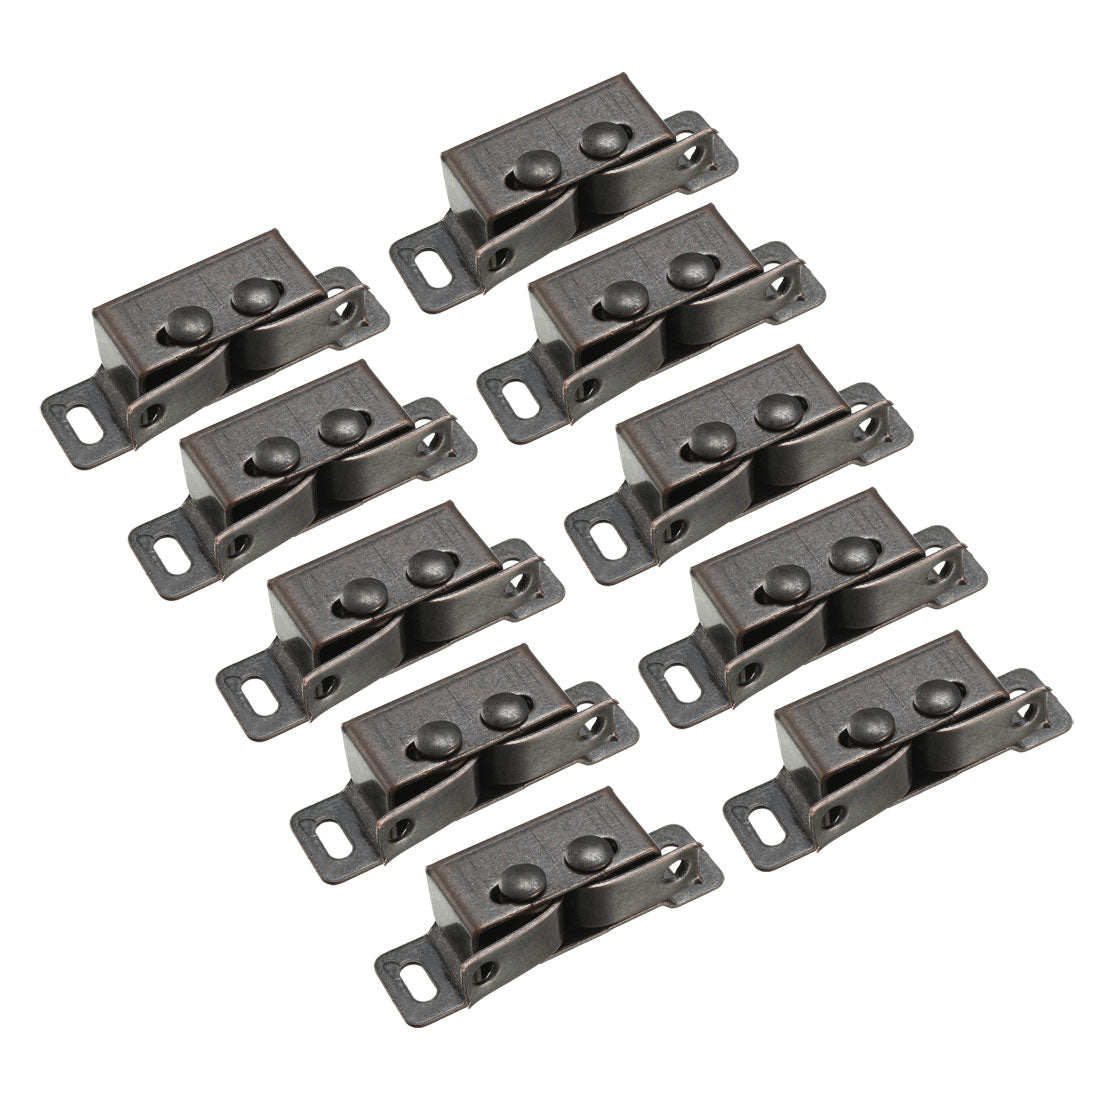 uxcell Uxcell Retro Wardrobe Door Iron Double Ball Roller Catch Latch, Copper Tone 10pcs